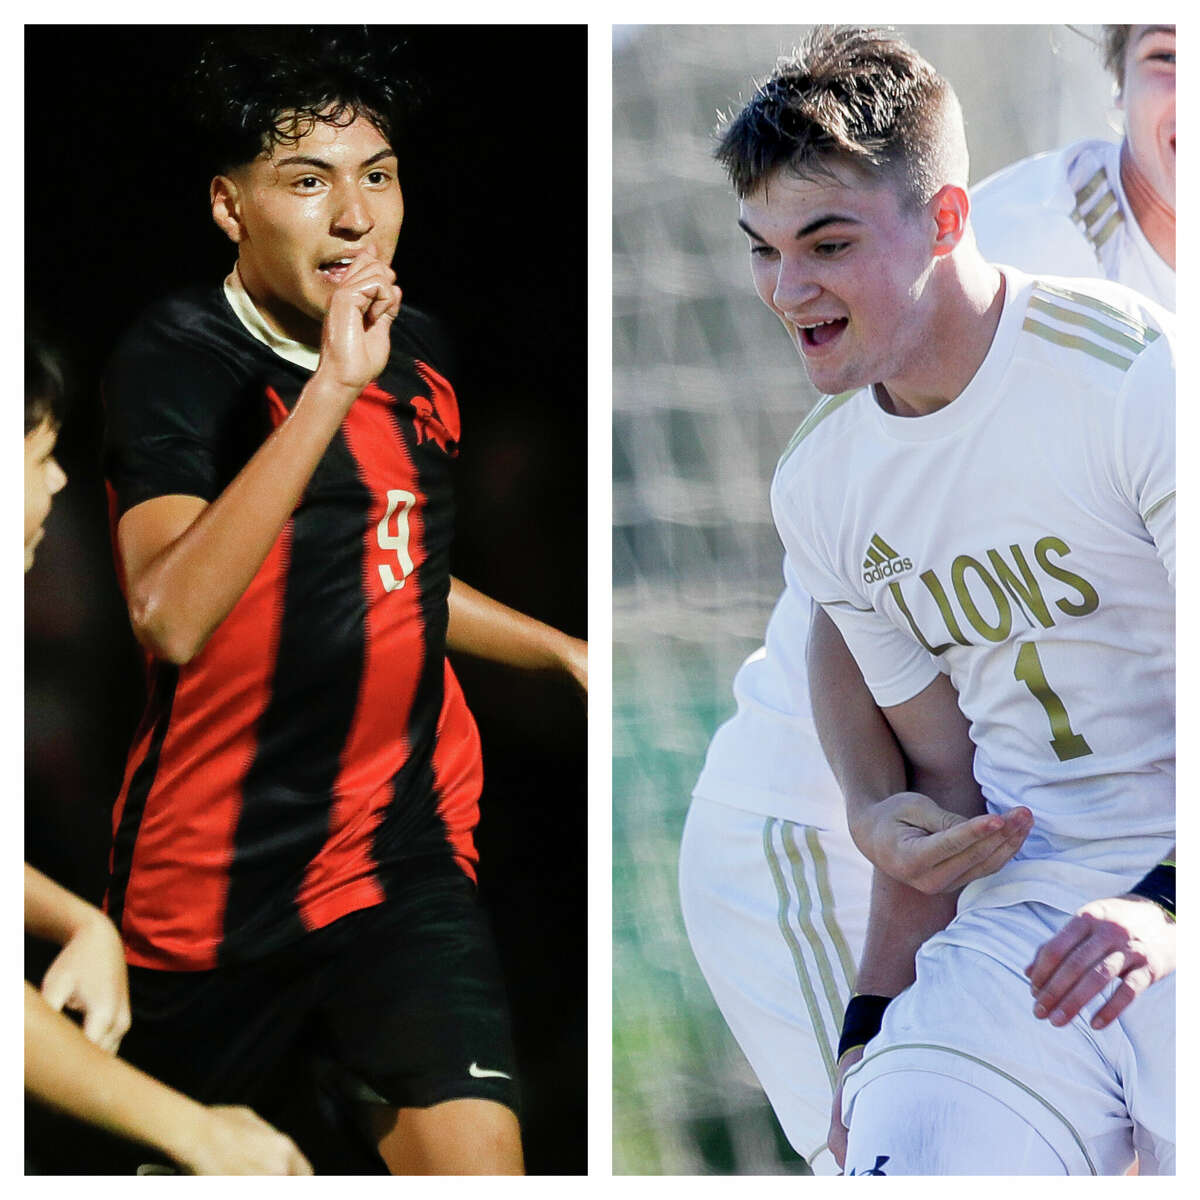 Porter's Rey Marquez, left, and Lake Creek's Justin Mayes, right, are a couple of the key players returning in Class 5A/4A soccer in Montgomery County.